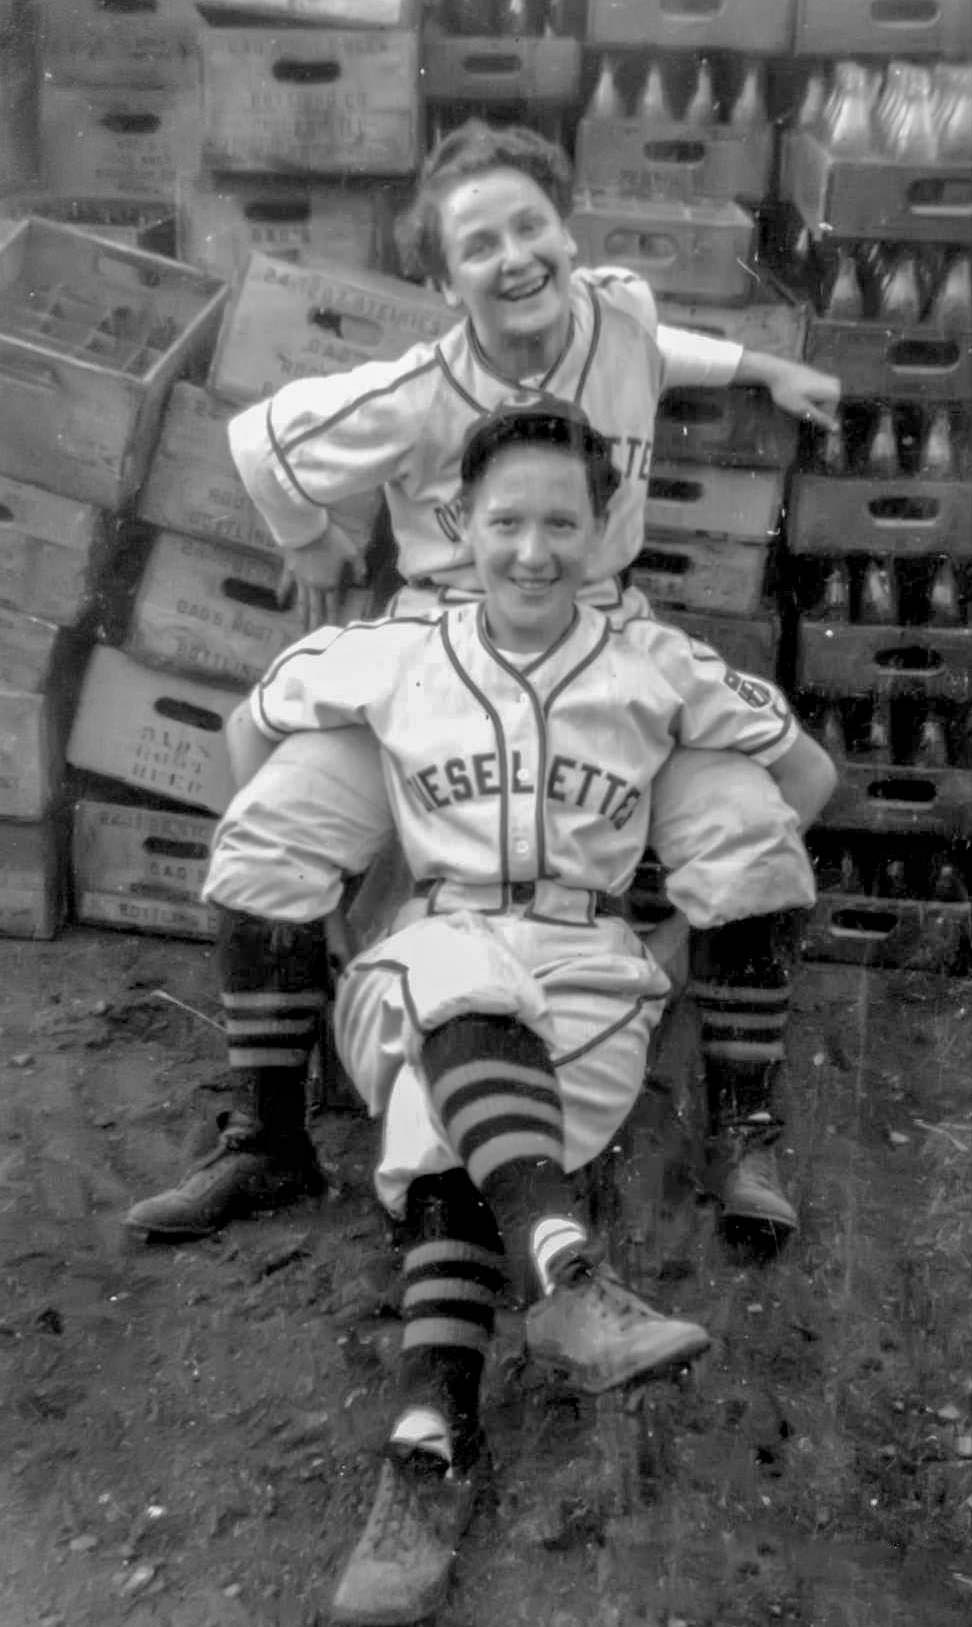 Mary "Max" Maxine (Schutt), pictured on bottom, and a teammate posing before a game among Coca Cola and other soft drink bottles, Peoria, Illinois, 1944.

The Caterpillar Dieselettes, from Mary Maxine's (Schutt) scrapbook. "Max" played from 1943 to '46. Also featured are Irene "Pepper" Kerwin and catcher Marian Kneer, pitcher Marie Wadlow, outfielder Carolyn Thome and second baseman Shirley Coney.

The Dieselettes are the oldest continuous softball team in America, playing since 1930. They were known as the Caterpillar Girls from 1930 to 1993, the Caterpillar Dieselettes from 1933-1955, the Sunnyland Lettes from 1956 to 1958, and became the current Pekin Lettes in 1959.